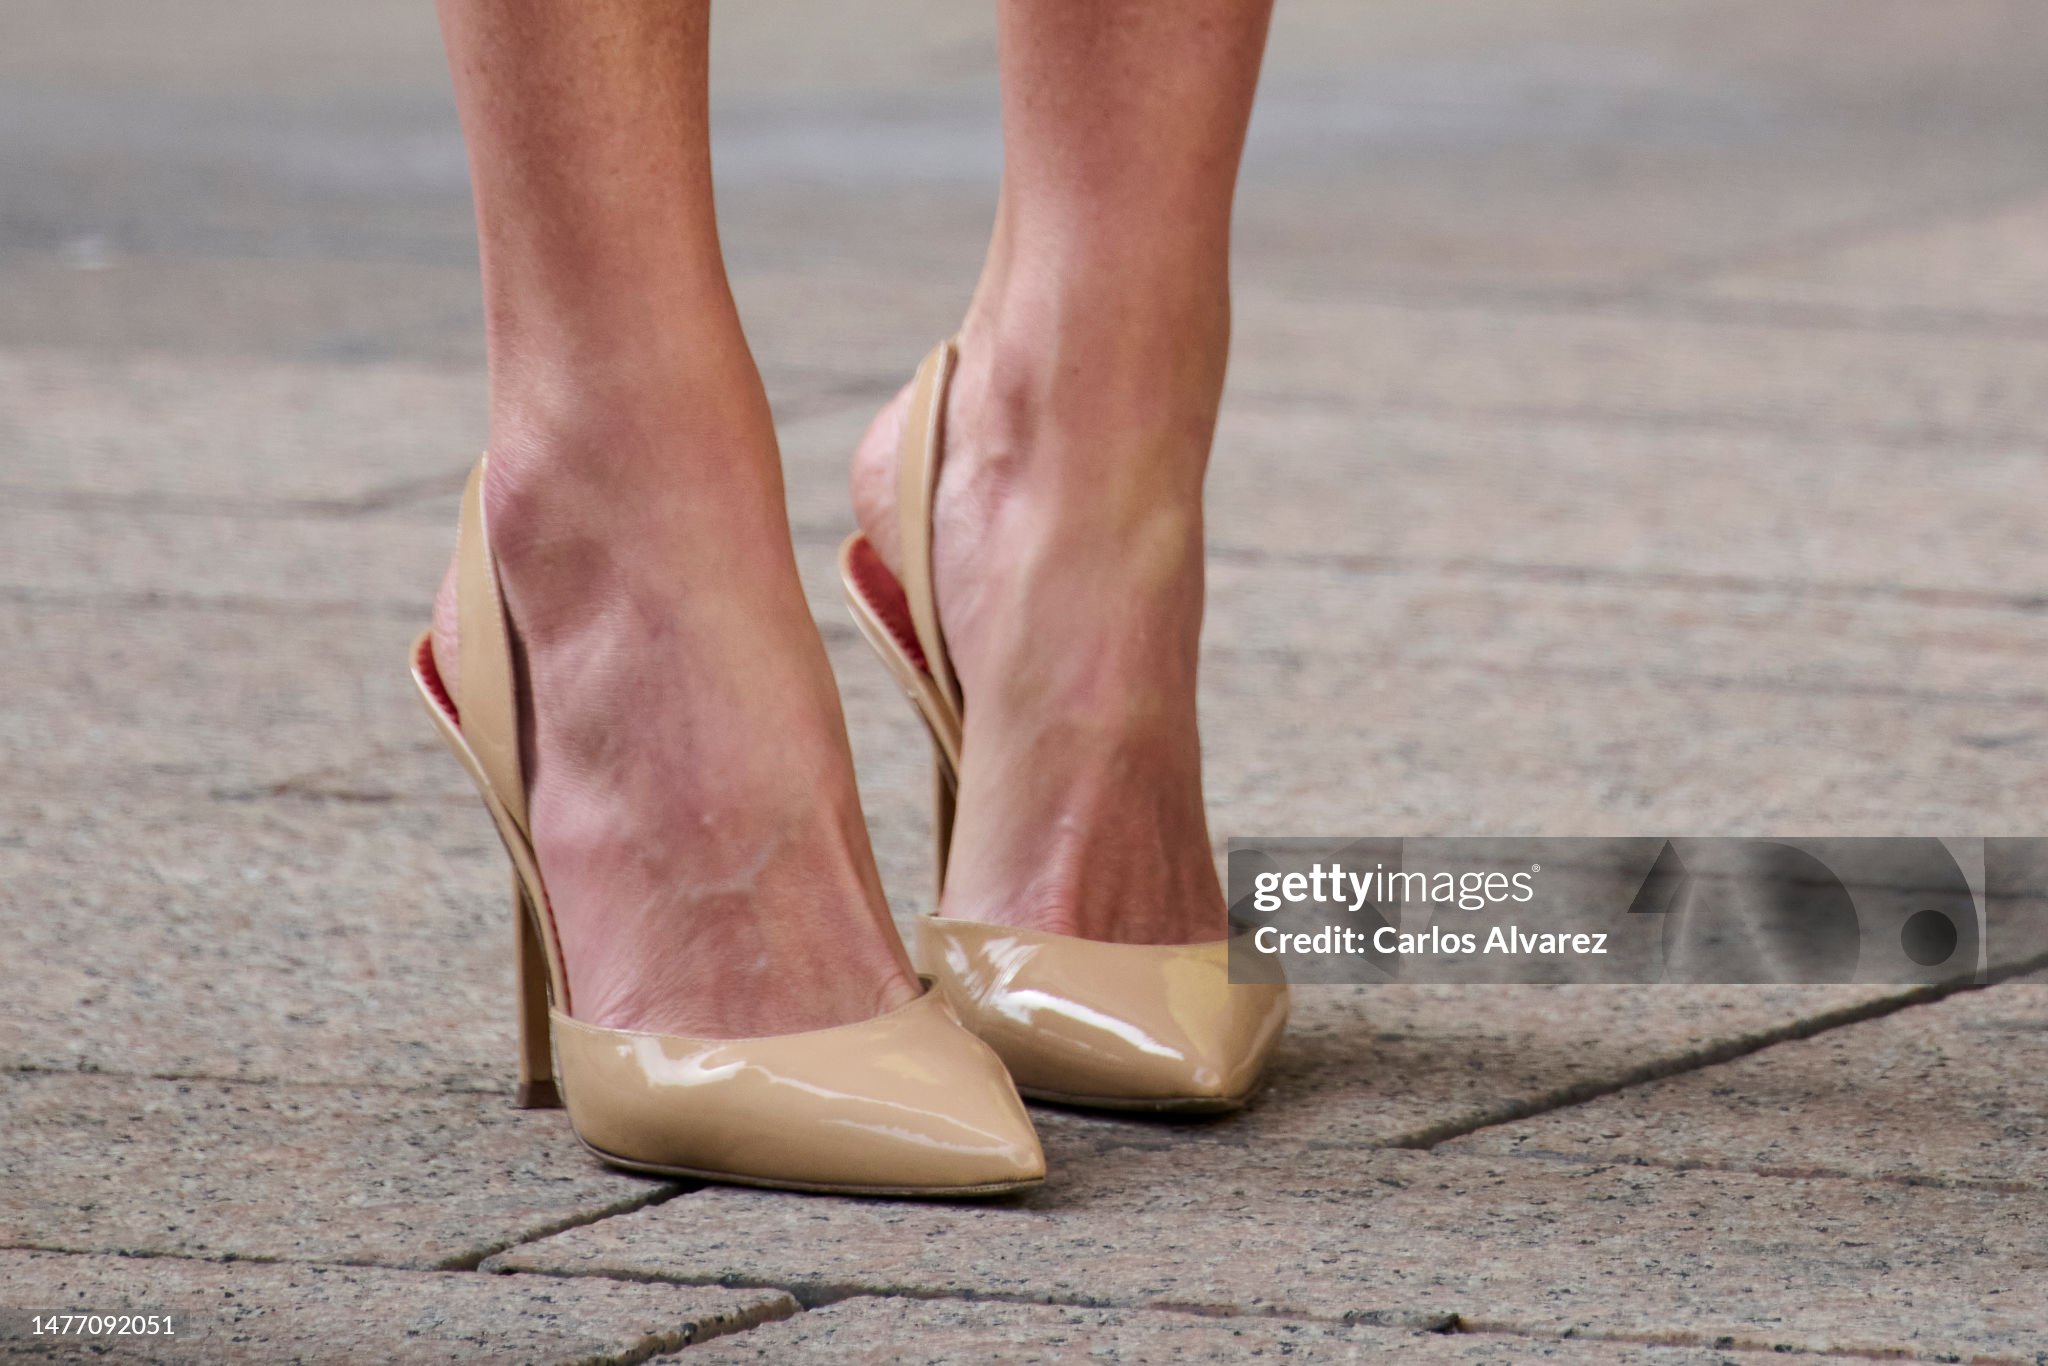 queen-letizia-of-spain-shoes-detail-attends-the-ix-international-congress-of-the-spanish.jpg